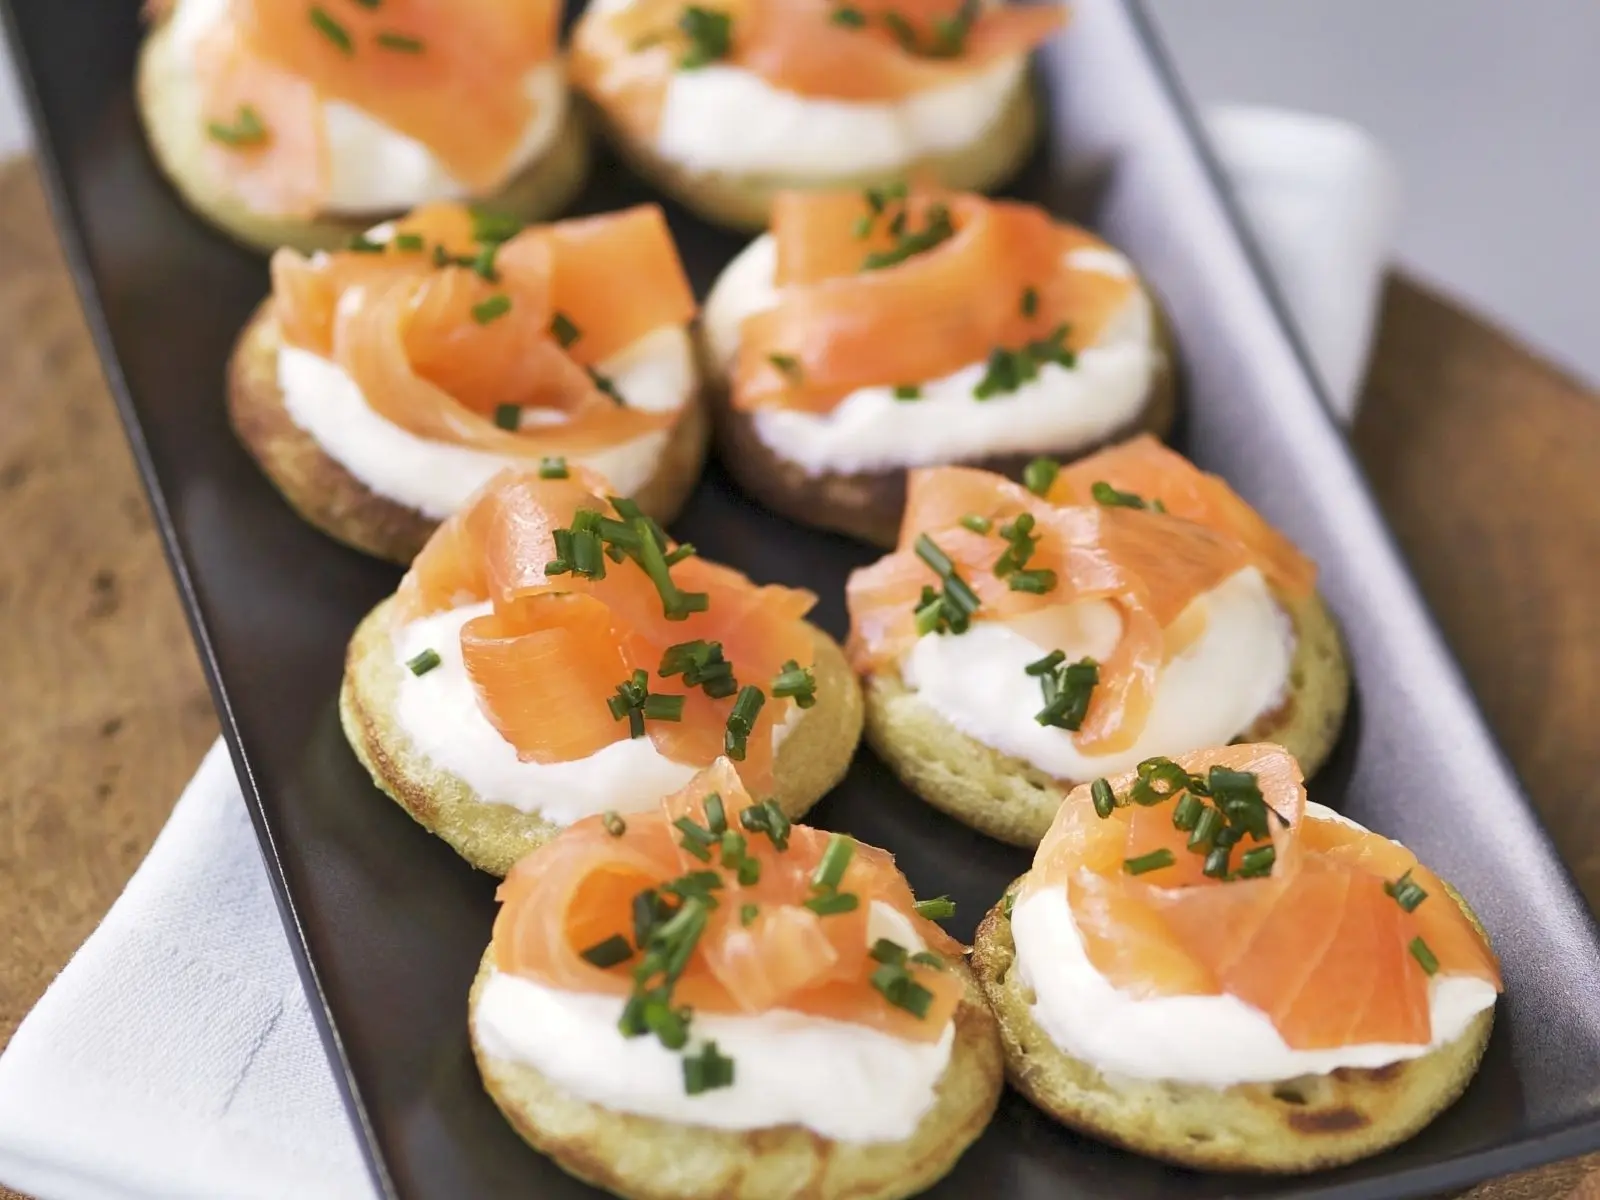 blini with smoked salmon and creme fraiche - How many calories in a smoked salmon blini